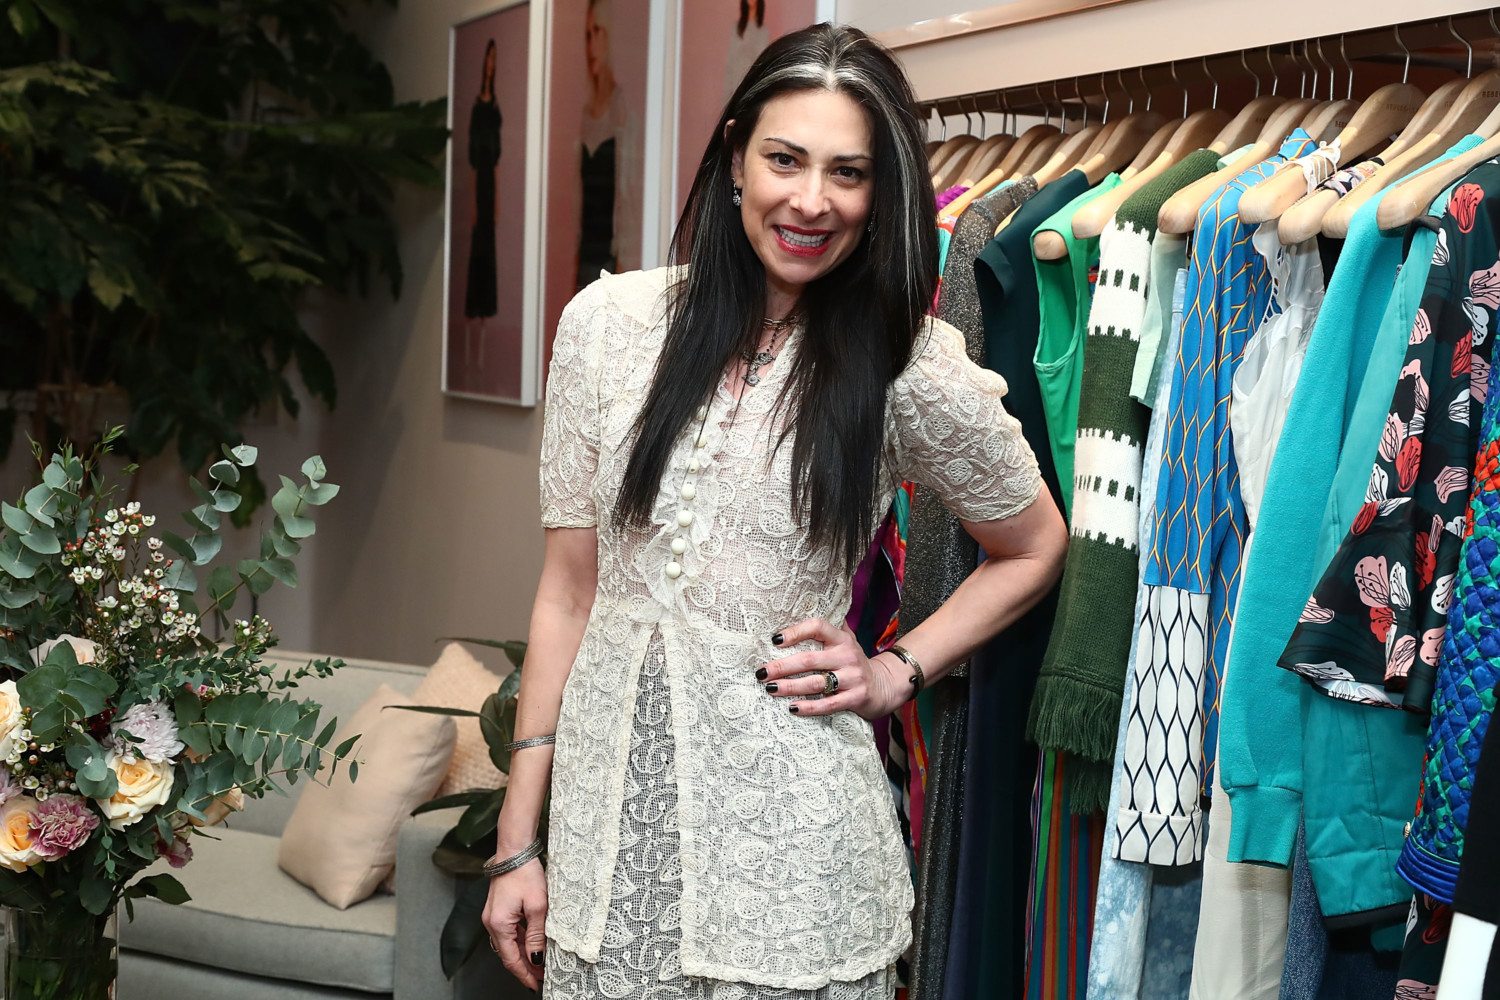 Vintage For A Cause Hosted By Rebecca Taylor, Christene Barberich, Stacy London, And Rachel Antonoff Benefitting She Should Run